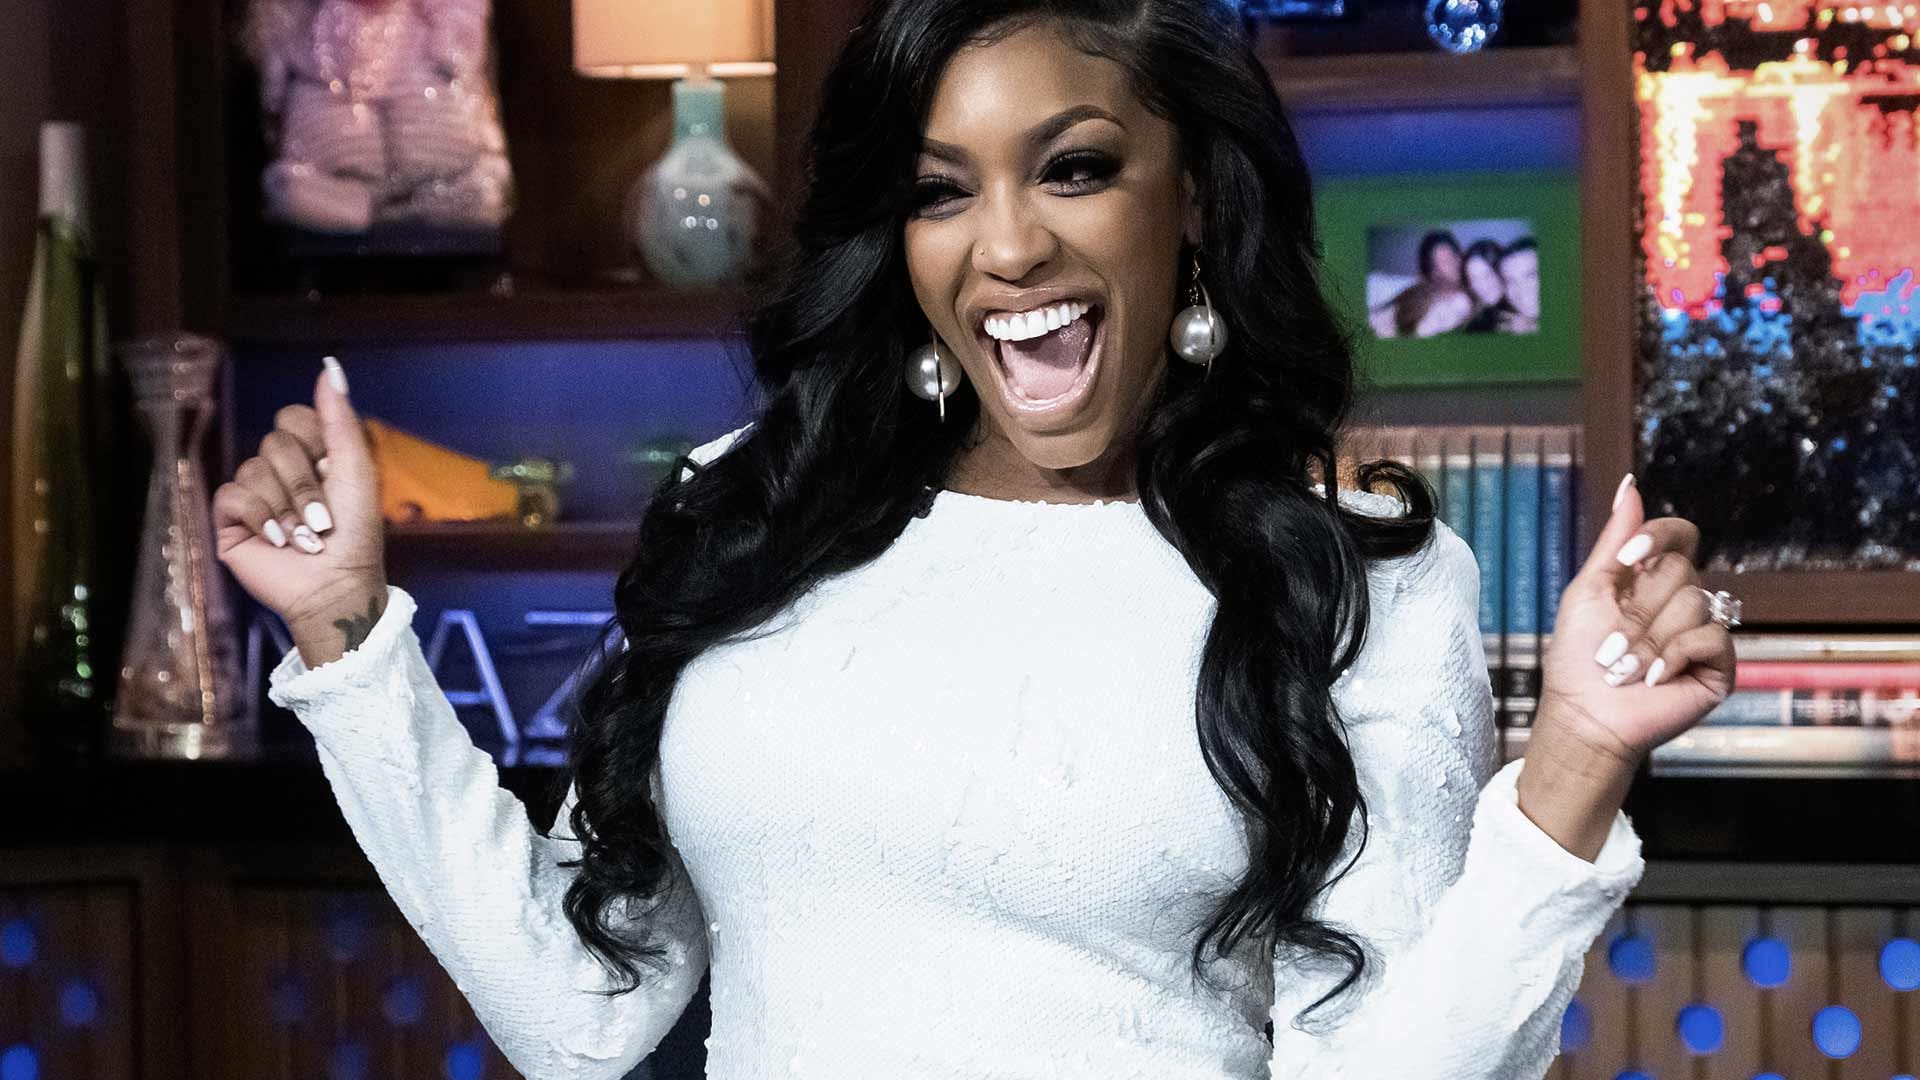 Porsha Williams Looks Amazing With Curly Hair And She Tells Fans Who They Can Get Her Look